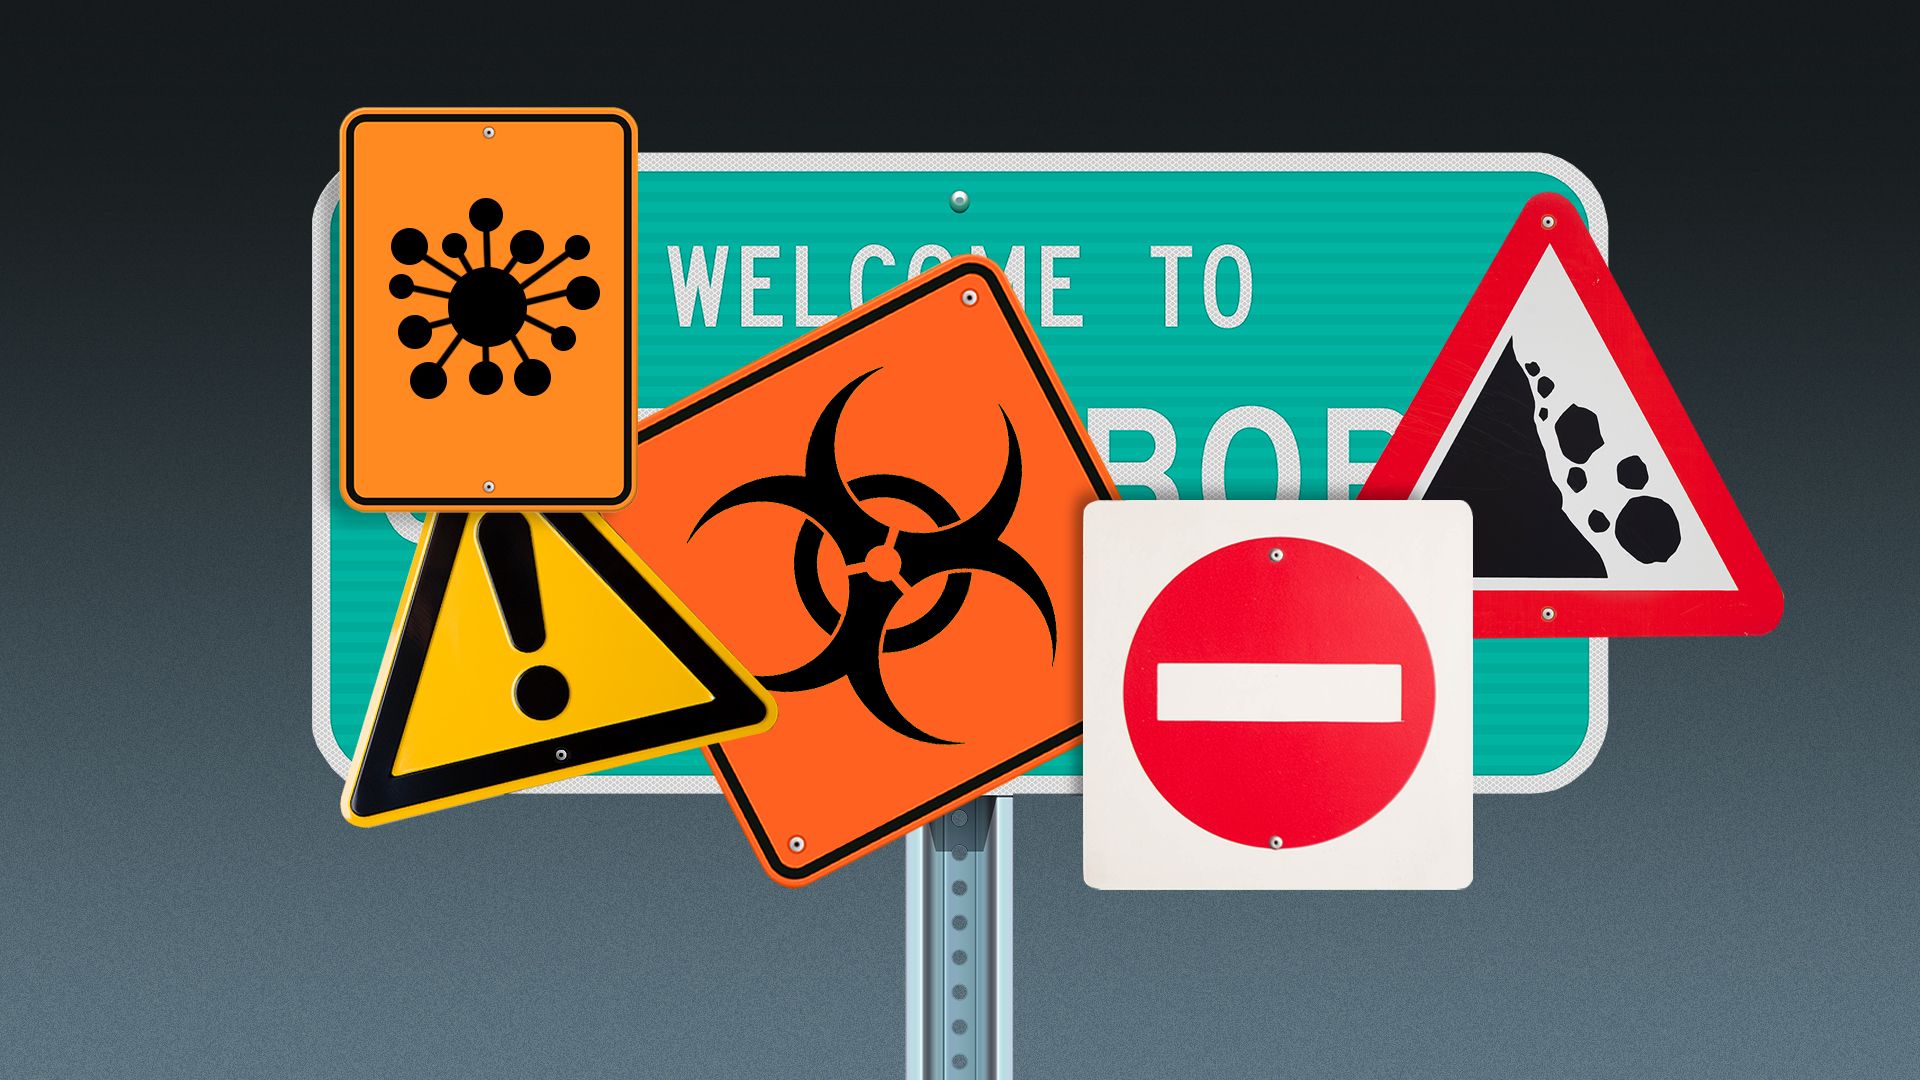 Illustration of city welcome sign covered in hazard and warning signs